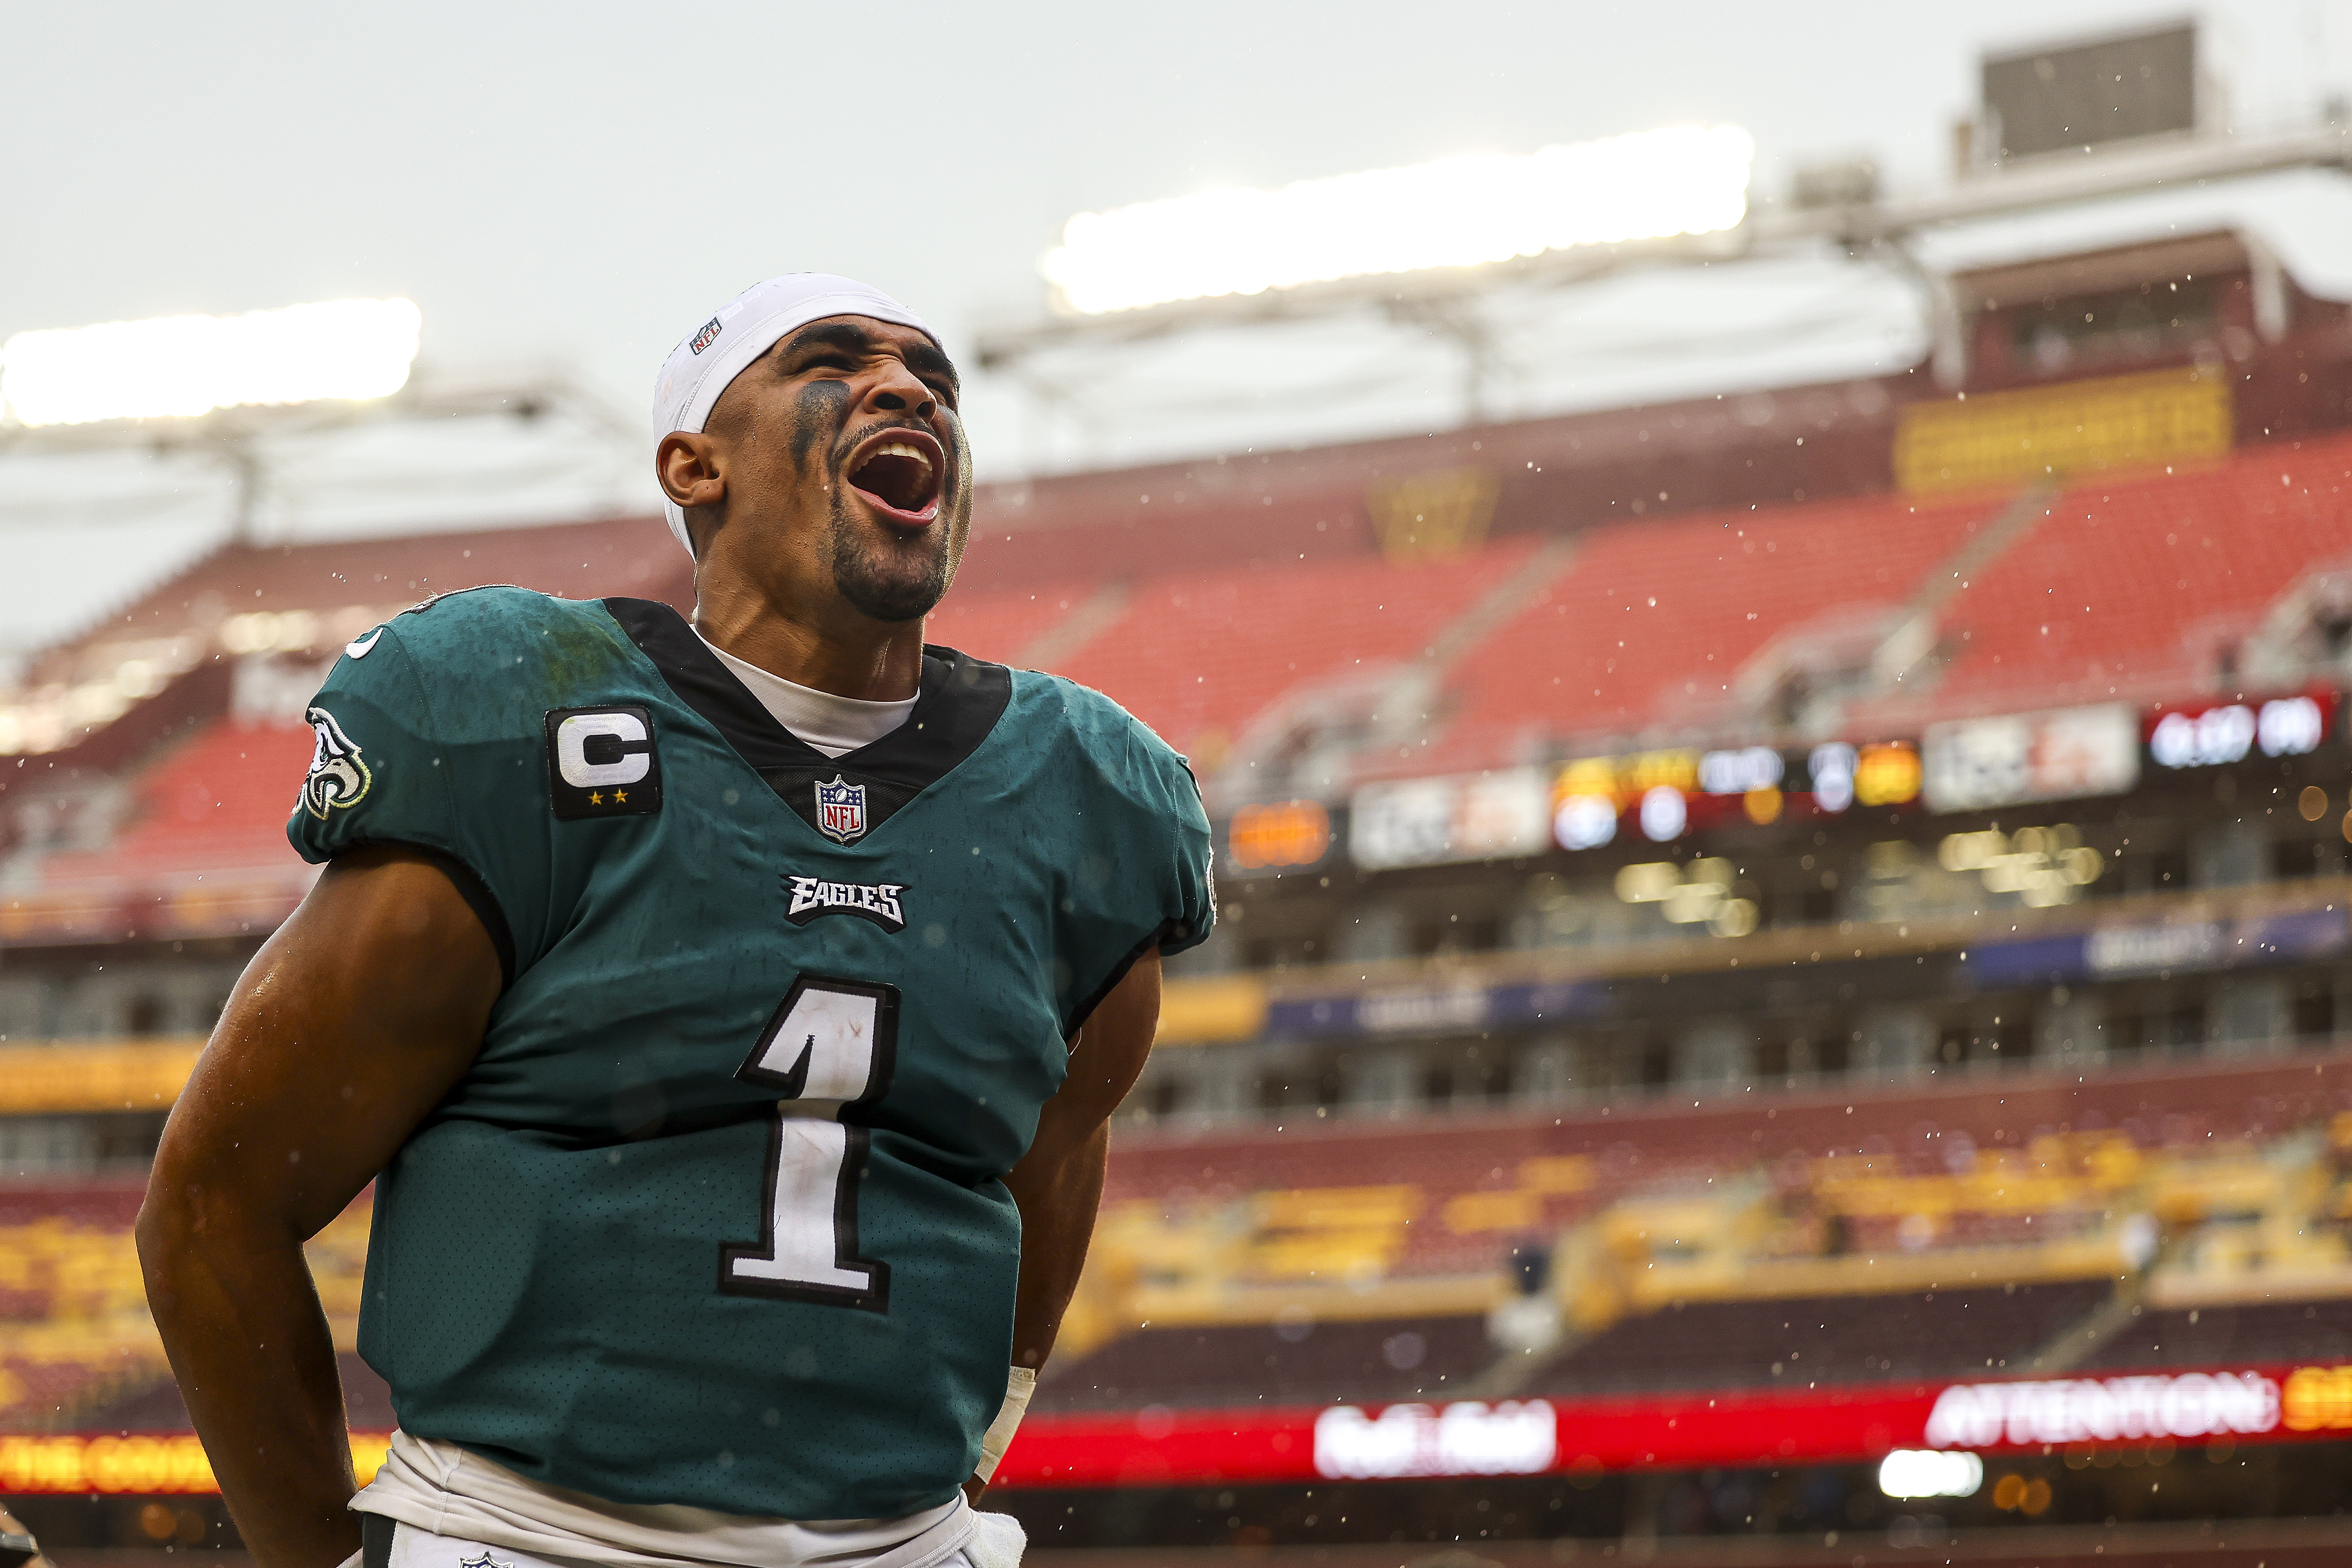 Quarterback Jalen Hurts #1 of the Philadelphia Eagles reacts after his team’s 24-8 win against the Washington Commanders at FedExField on September 25, 2022 in Landover, Maryland.